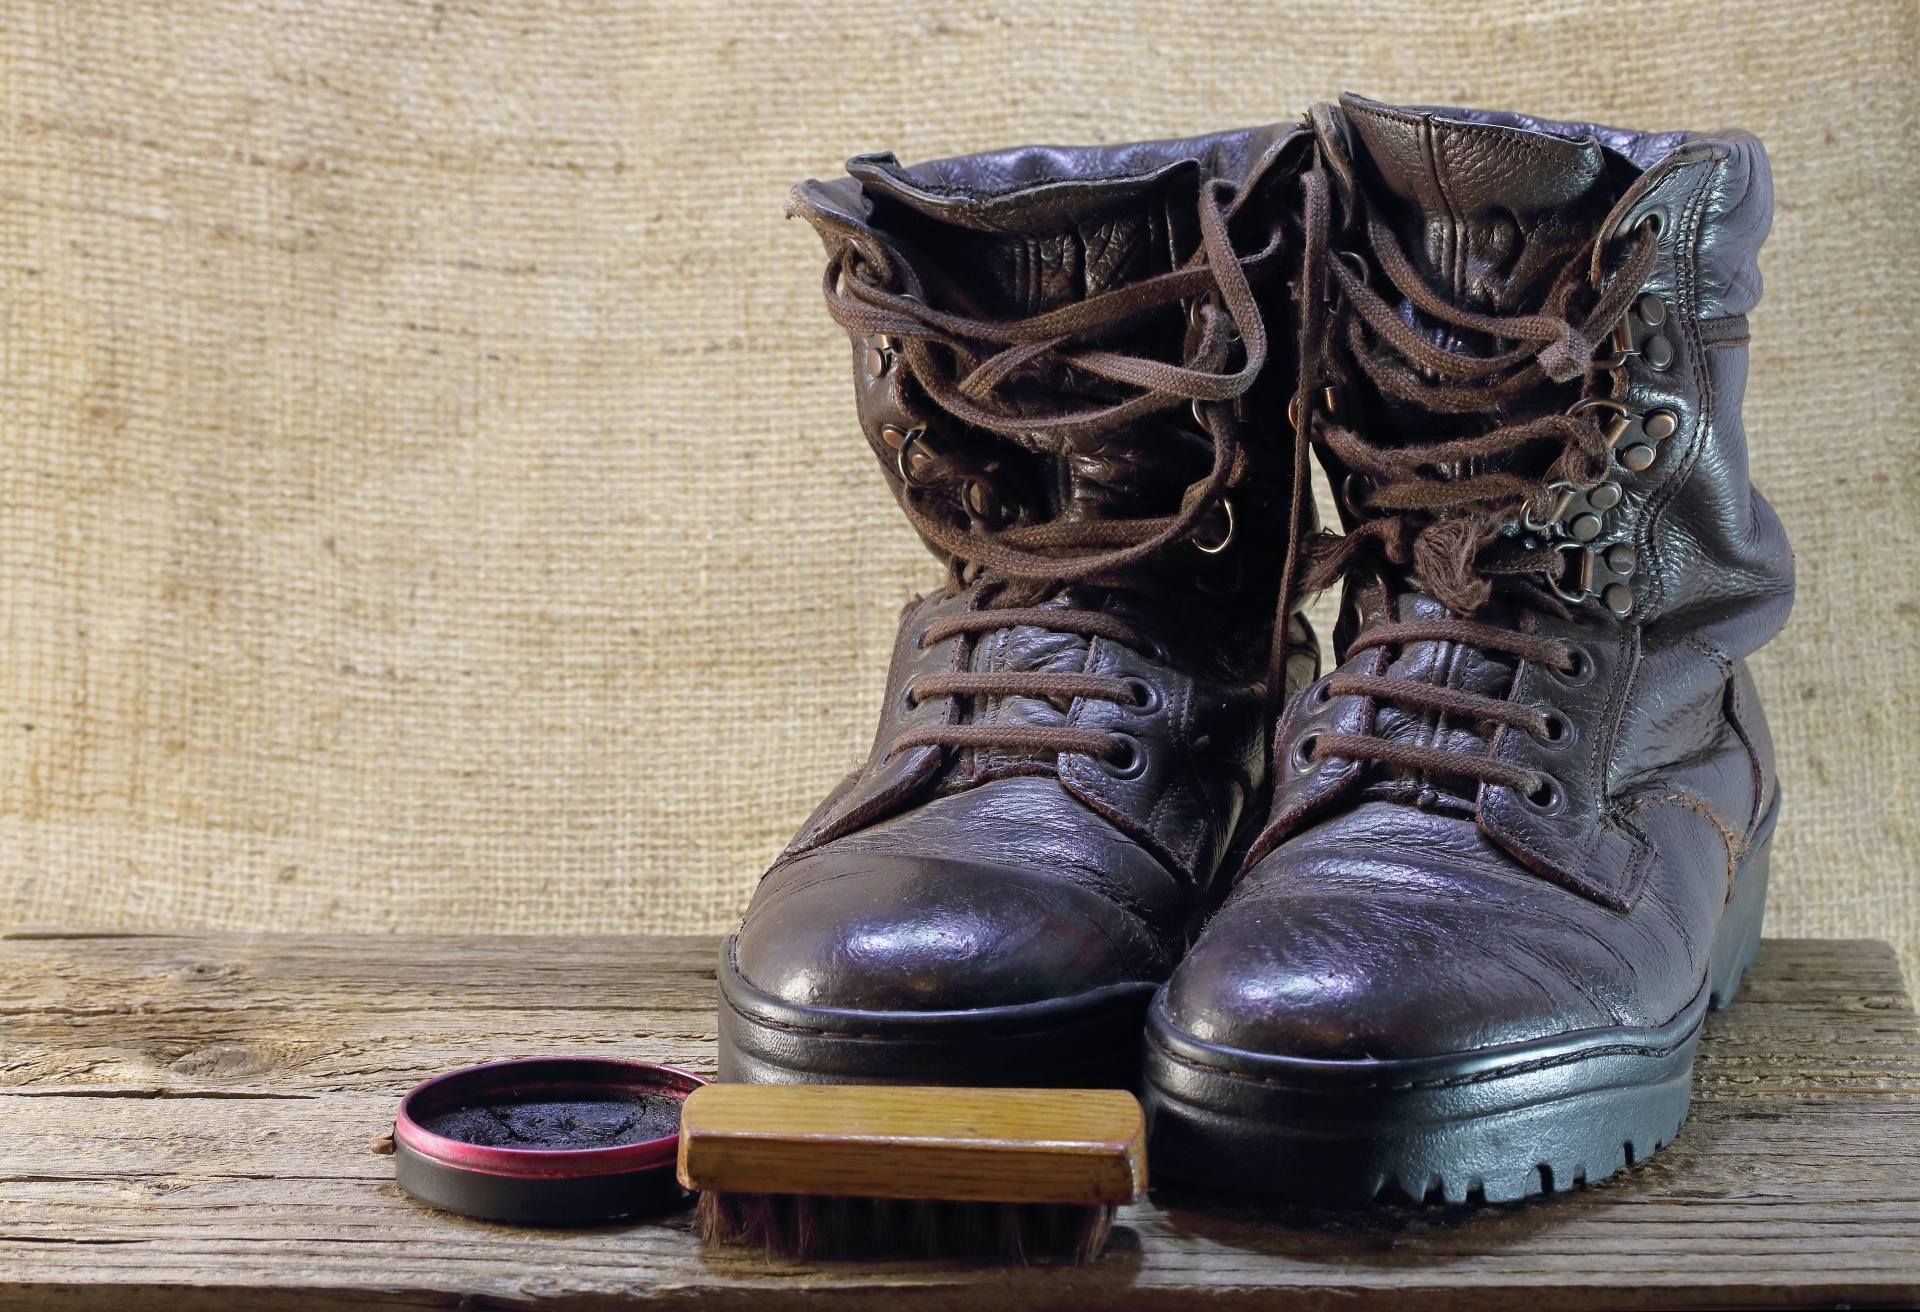 pair of old shiny combat boots with polish and brush against hessian backdrop